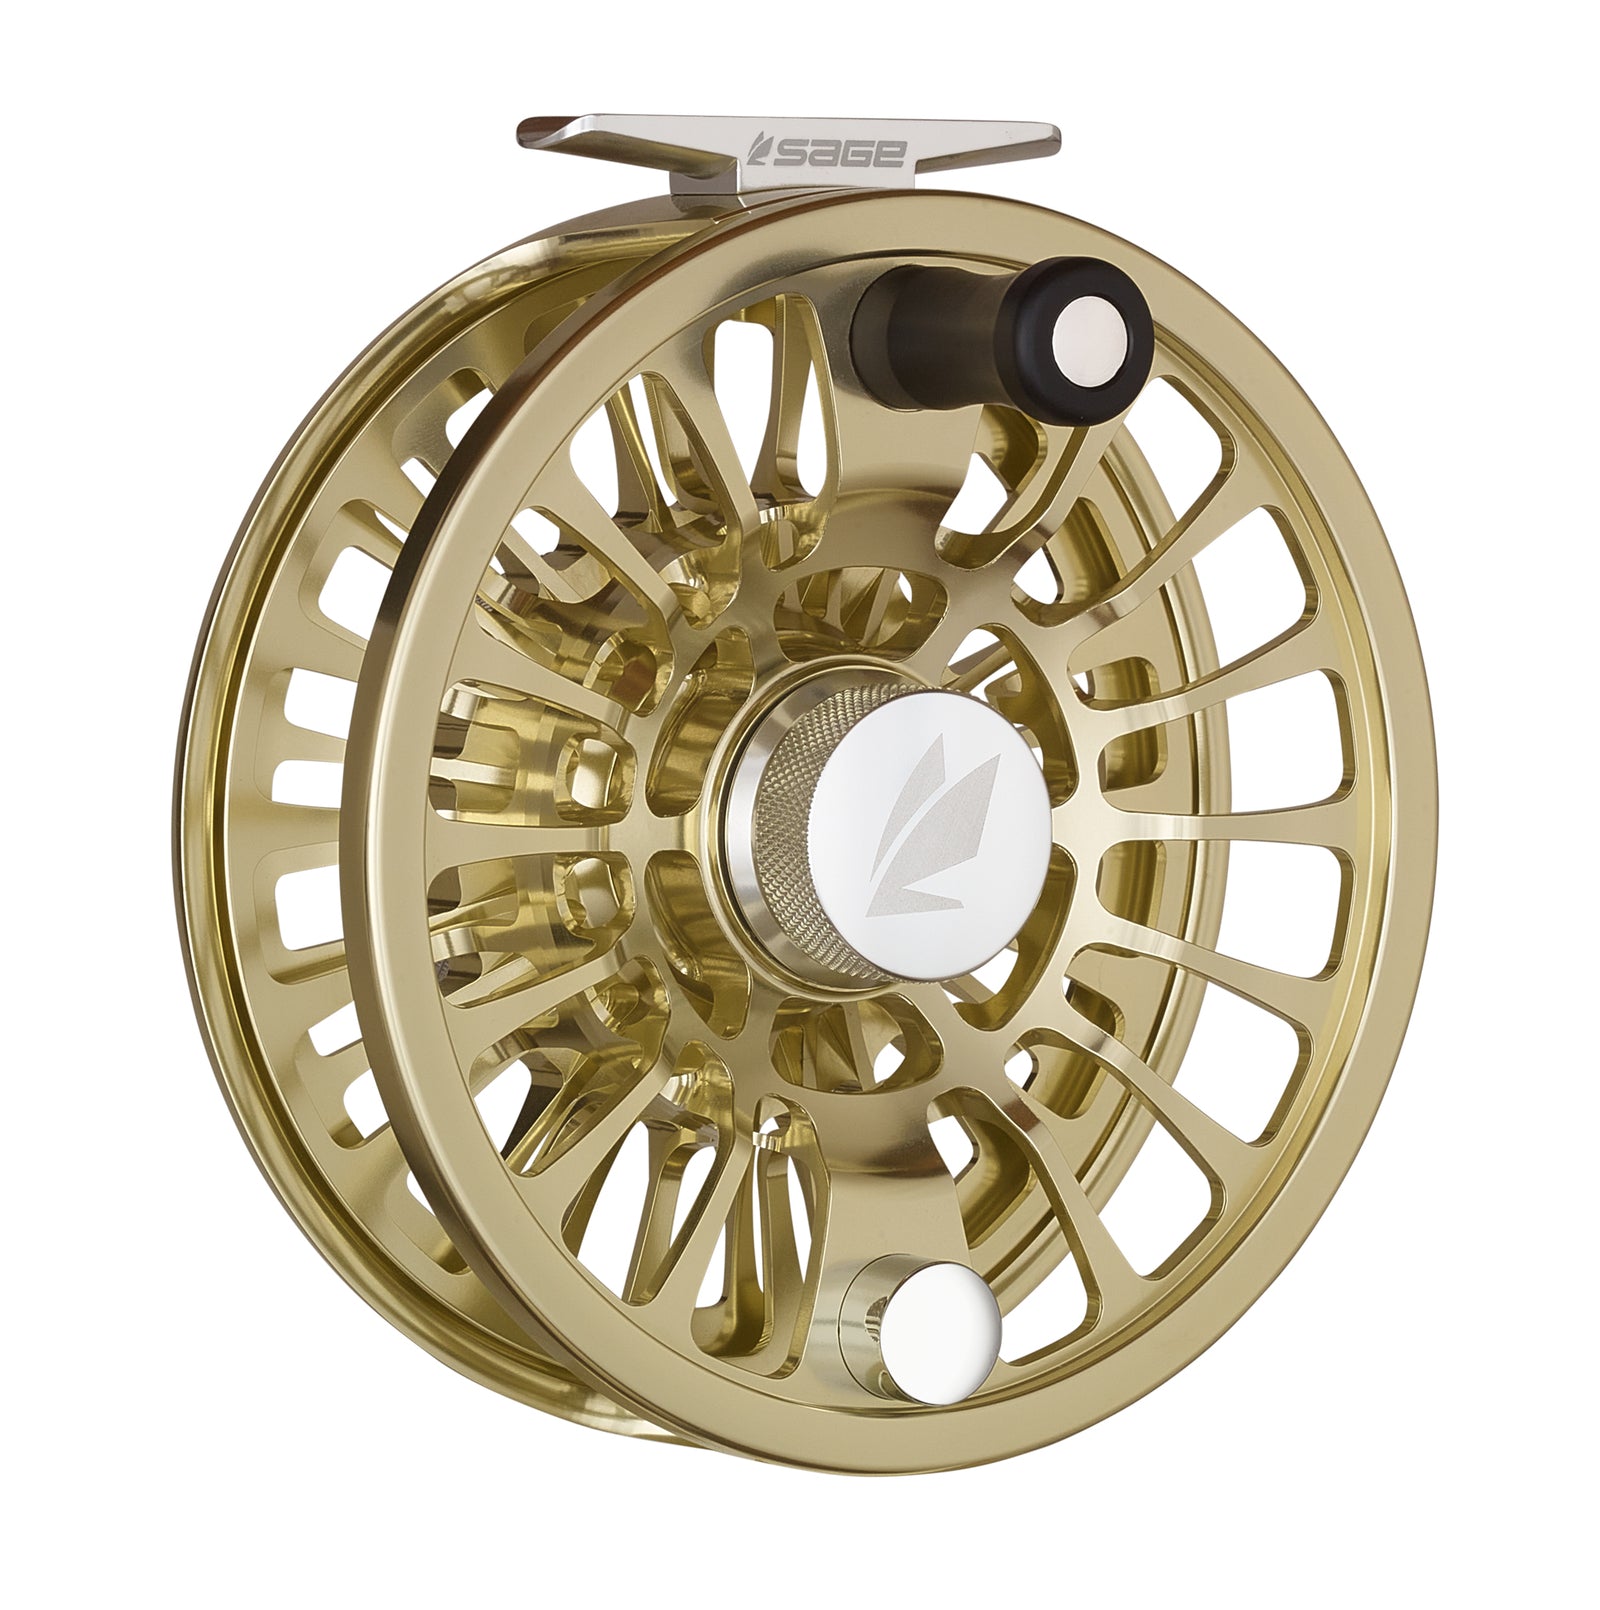 SAGE Fly Reels - Enforcer, Thermo, Spectrum Series